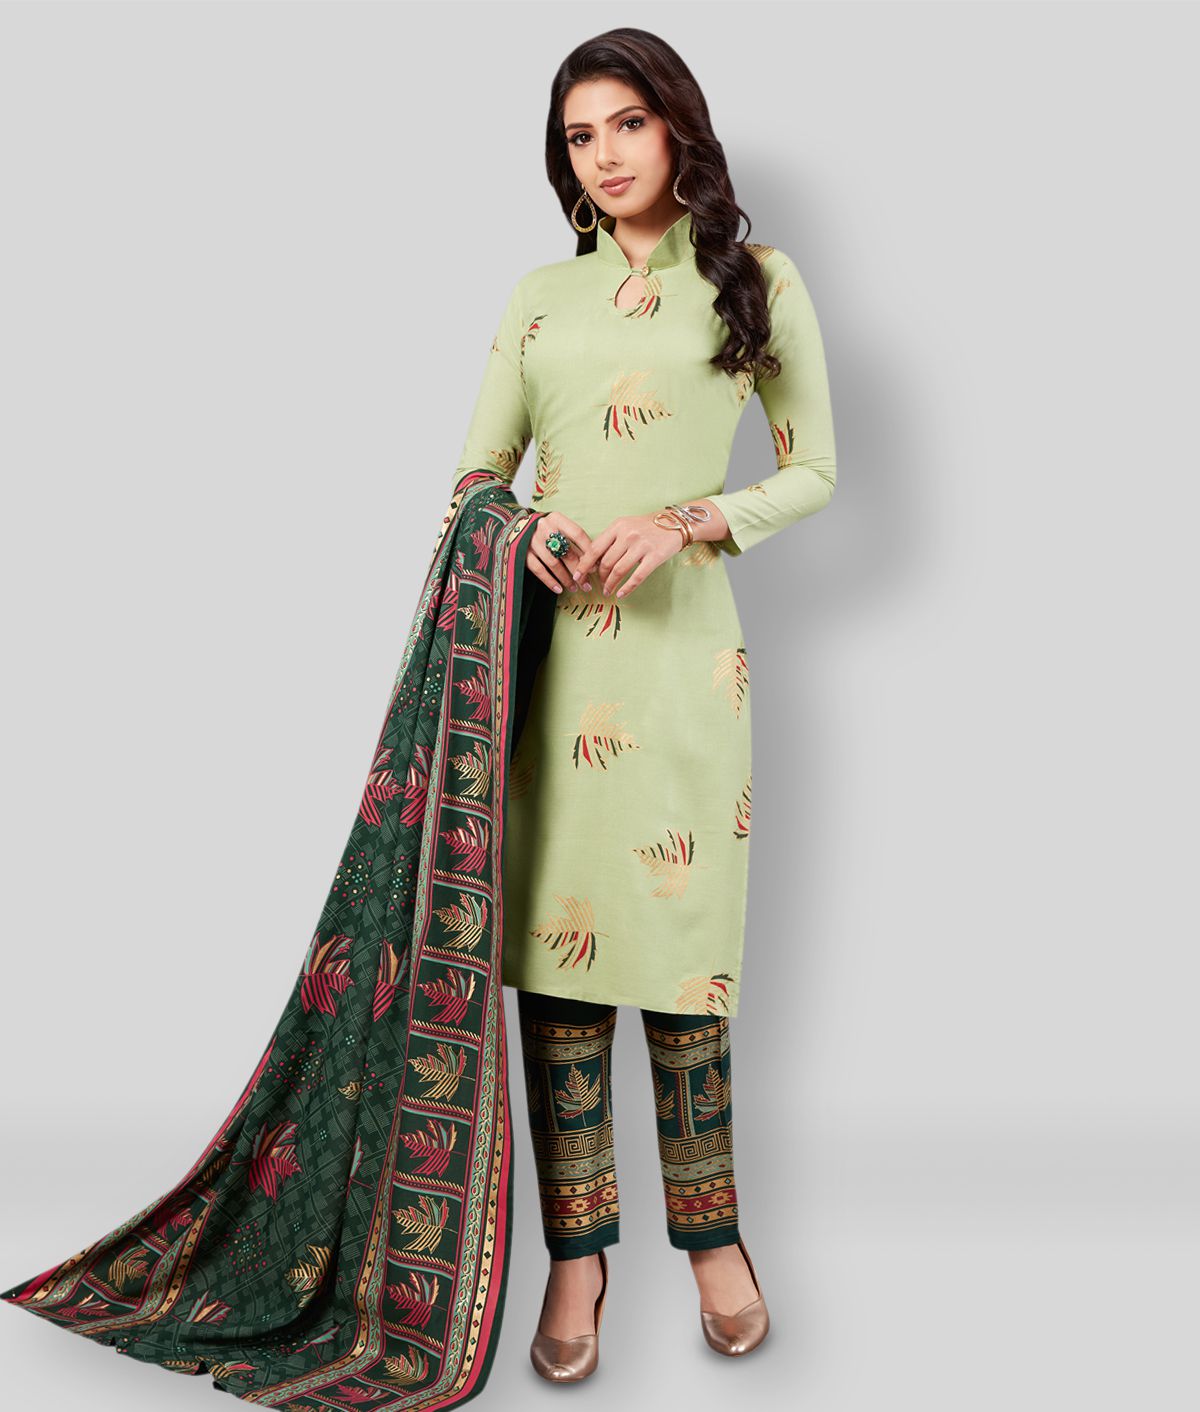     			shree jeenmata collection - Olive Straight Rayon Women's Stitched Salwar Suit ( Pack of 1 )